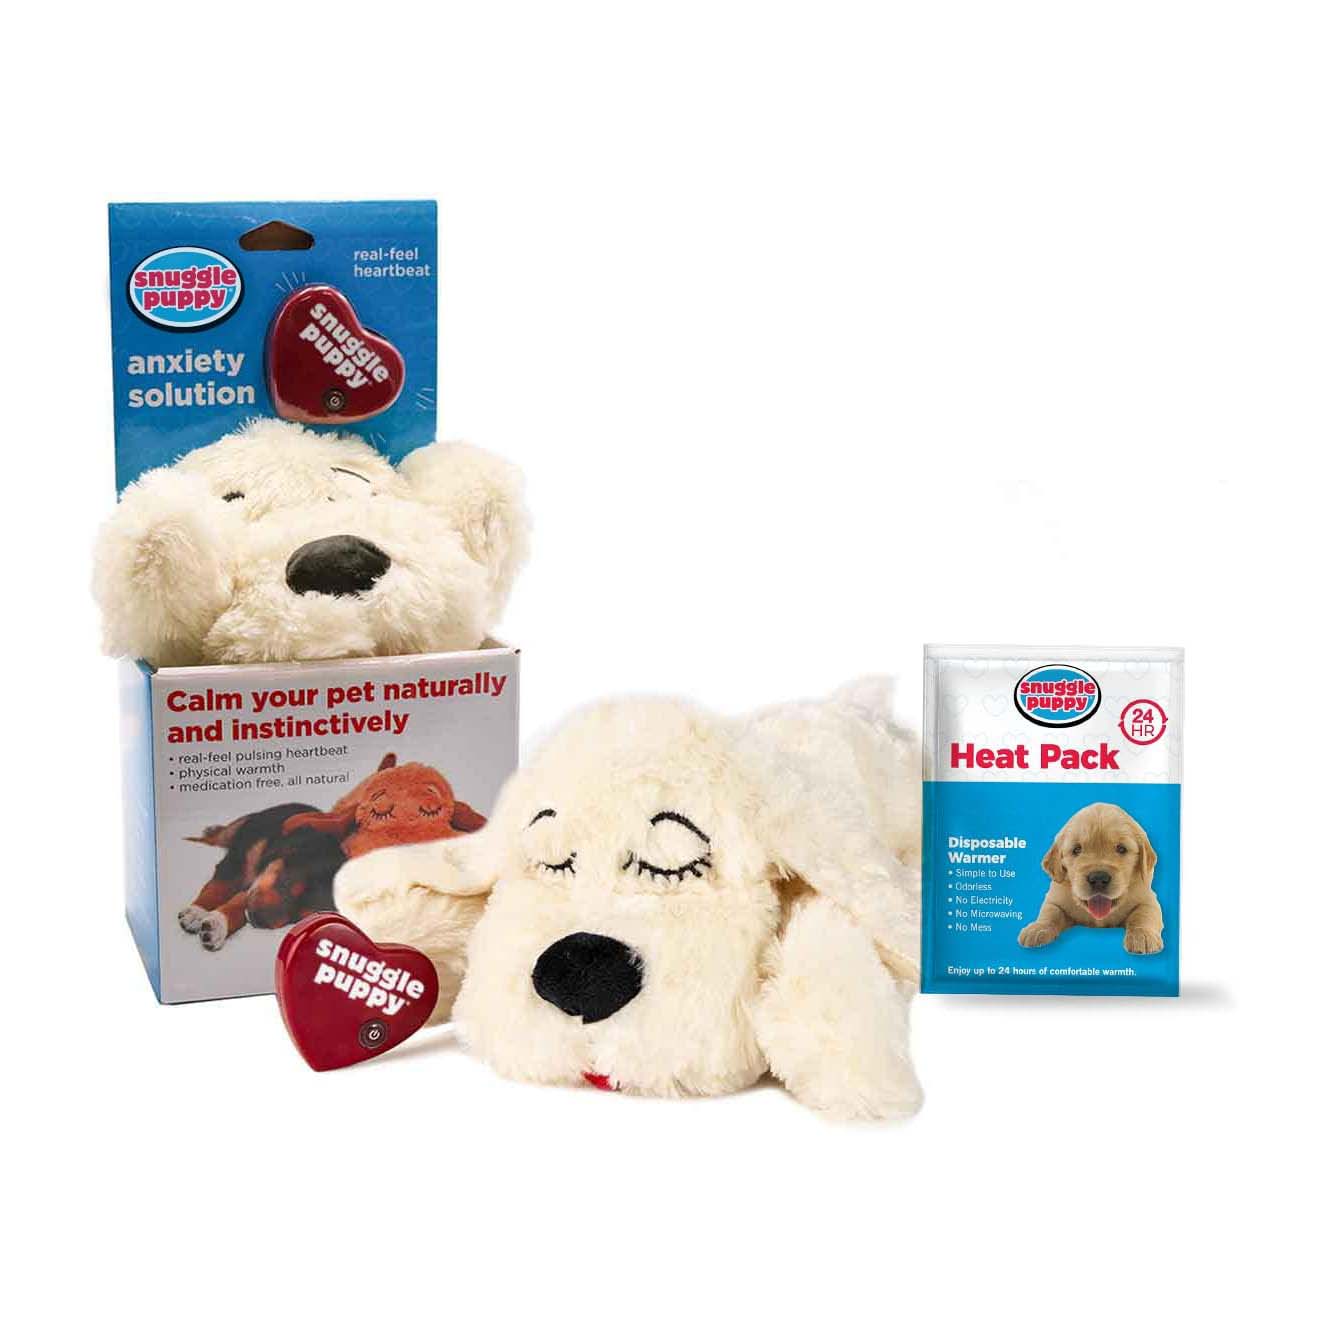 SmartPetLove Snuggle Puppy Heartbeat Stuffed Toy for Dogs in cream with heat pack